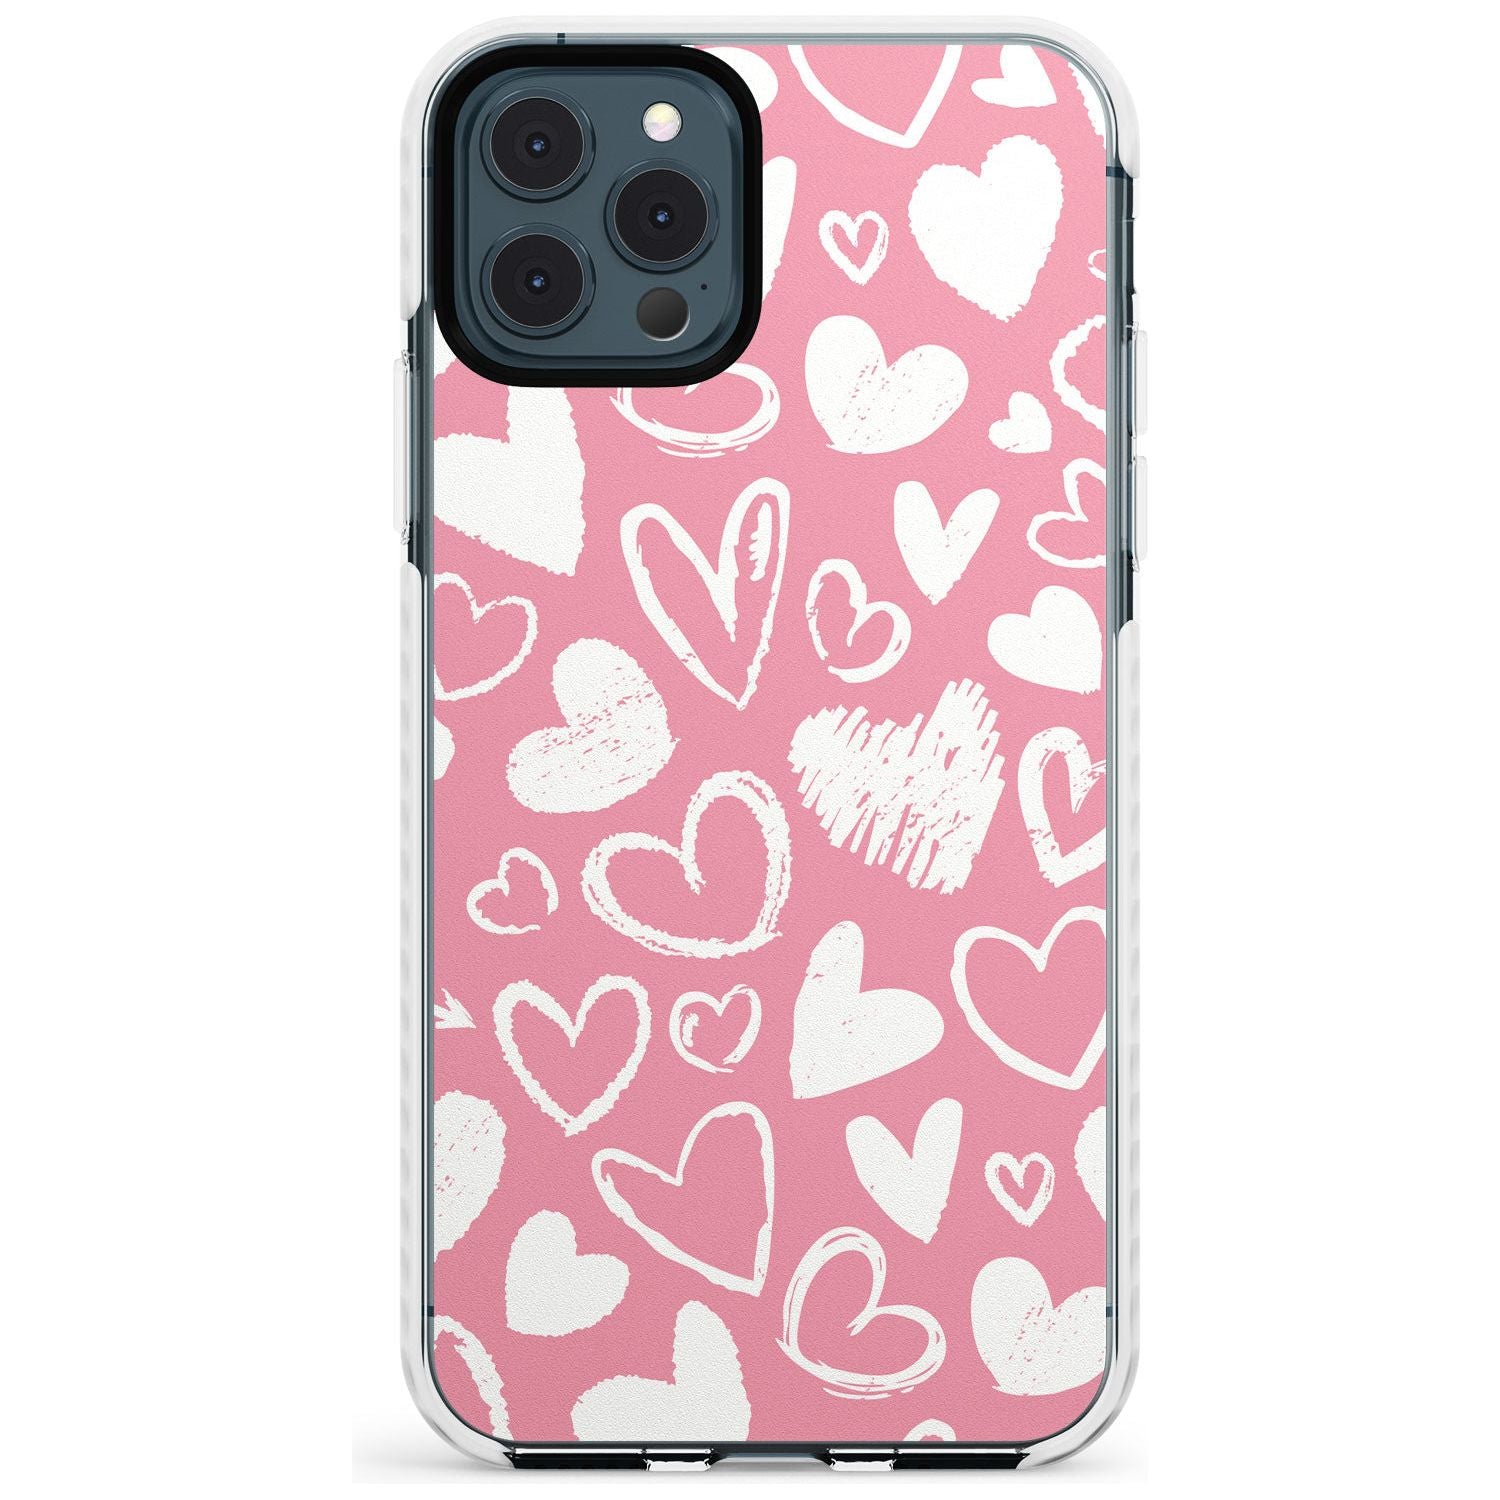 Chalk Hearts Impact Phone Case for iPhone 11 Pro Max